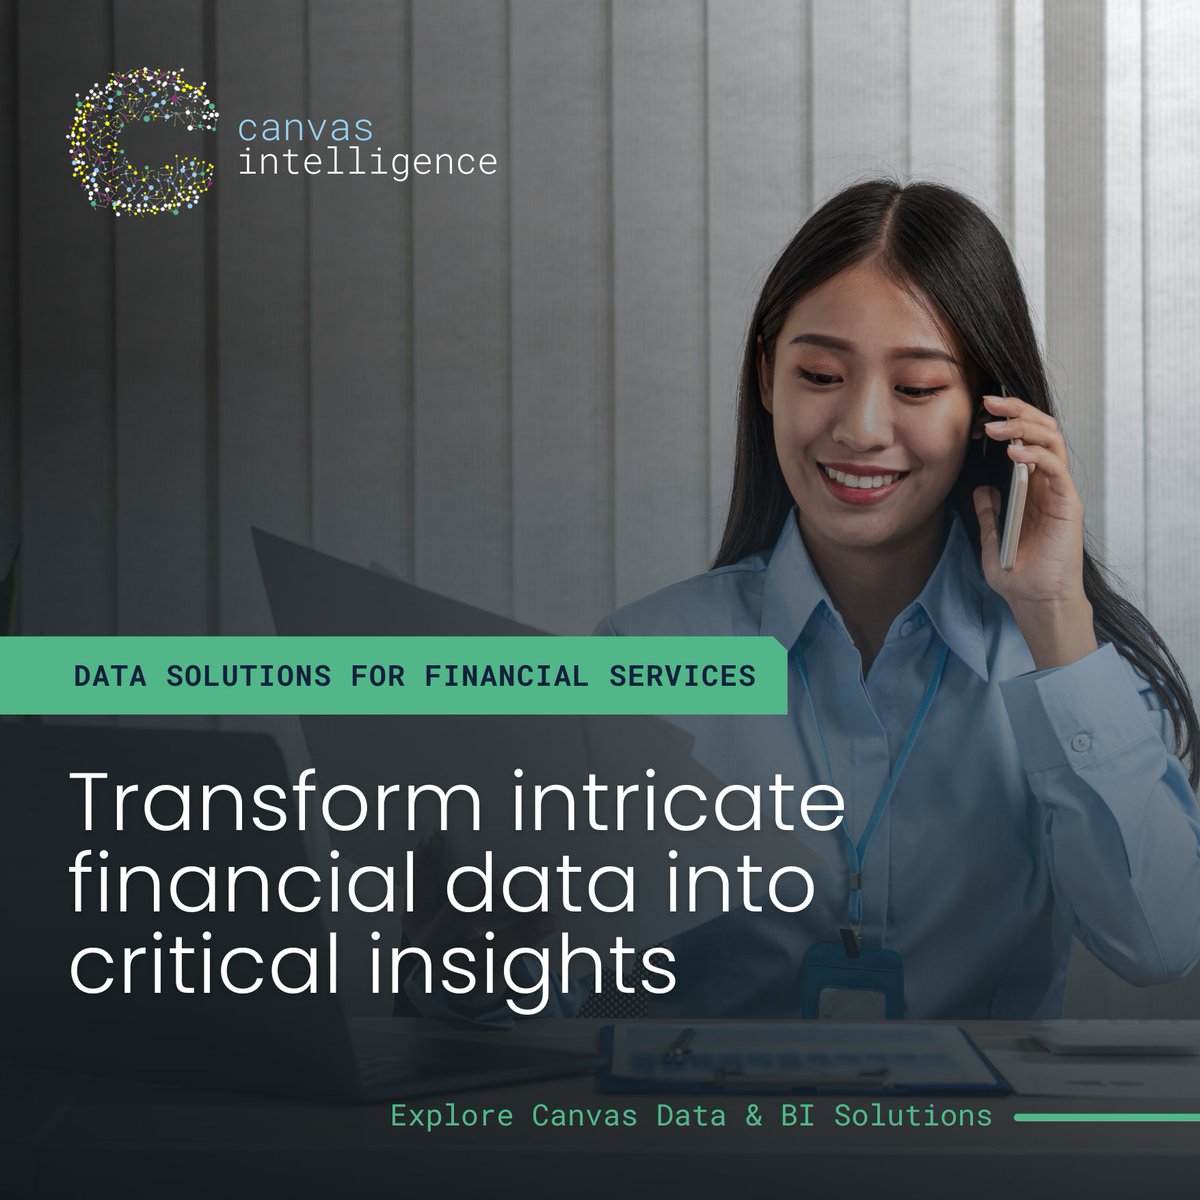 In the dynamic arena of financial services, data is the key to innovation, enhanced risk management, and maintaining a competitive edge. 

Learn more about how we help financial services businesses thrive: bit.ly/4dygxp0

#FinancialServices #BusinessIntelligence